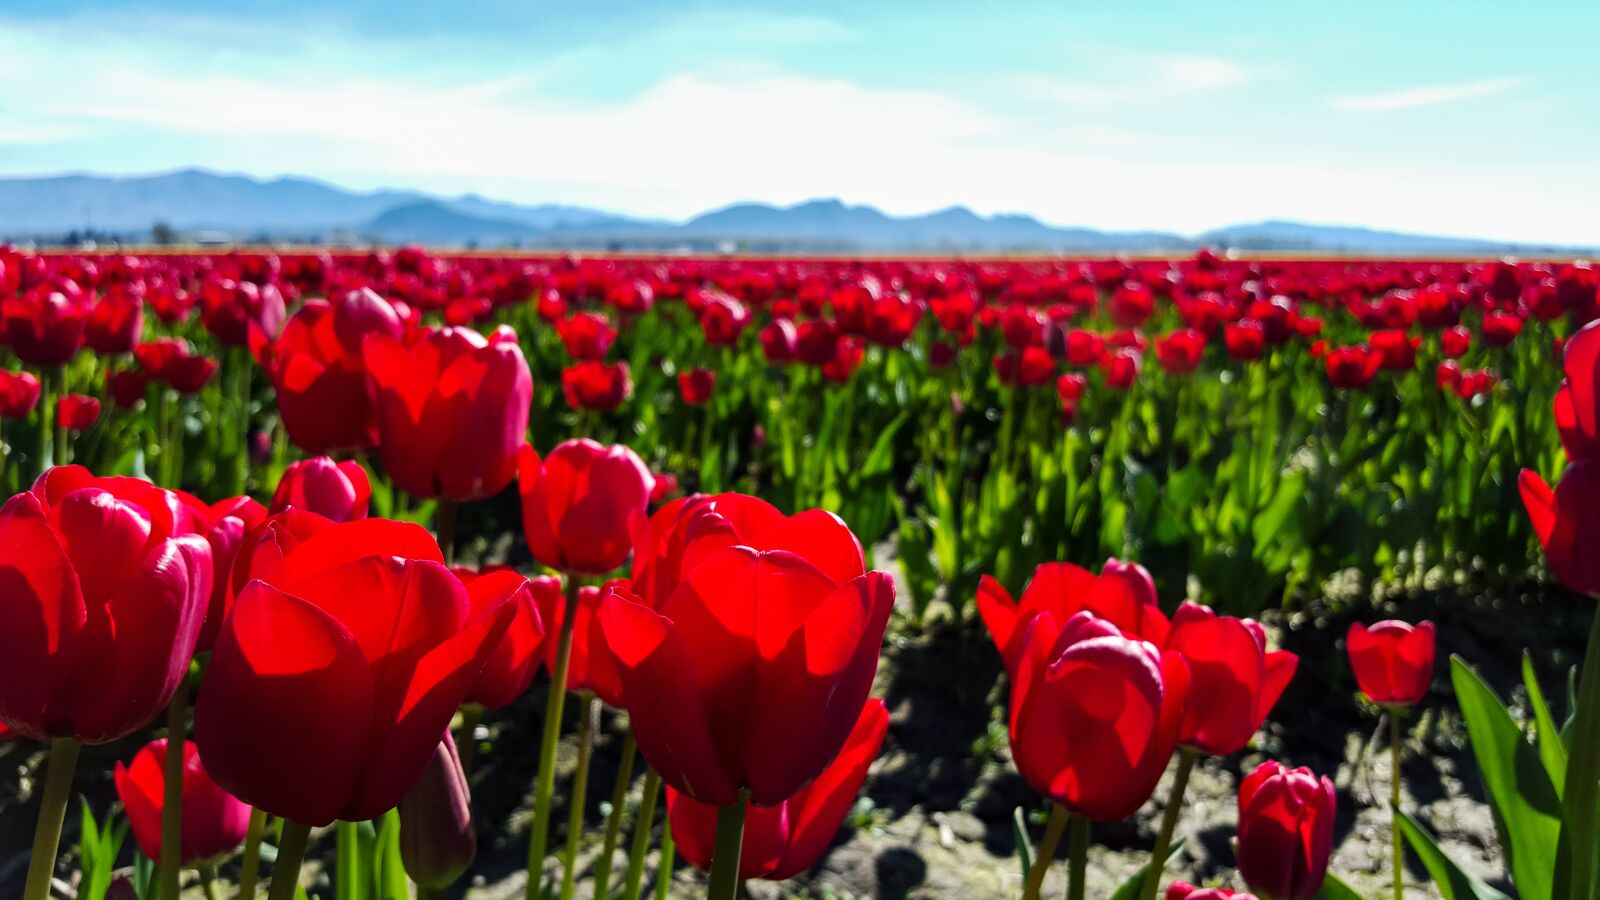 Samsung Galaxy S6 sample photo. Tulips, red, tulip field photography